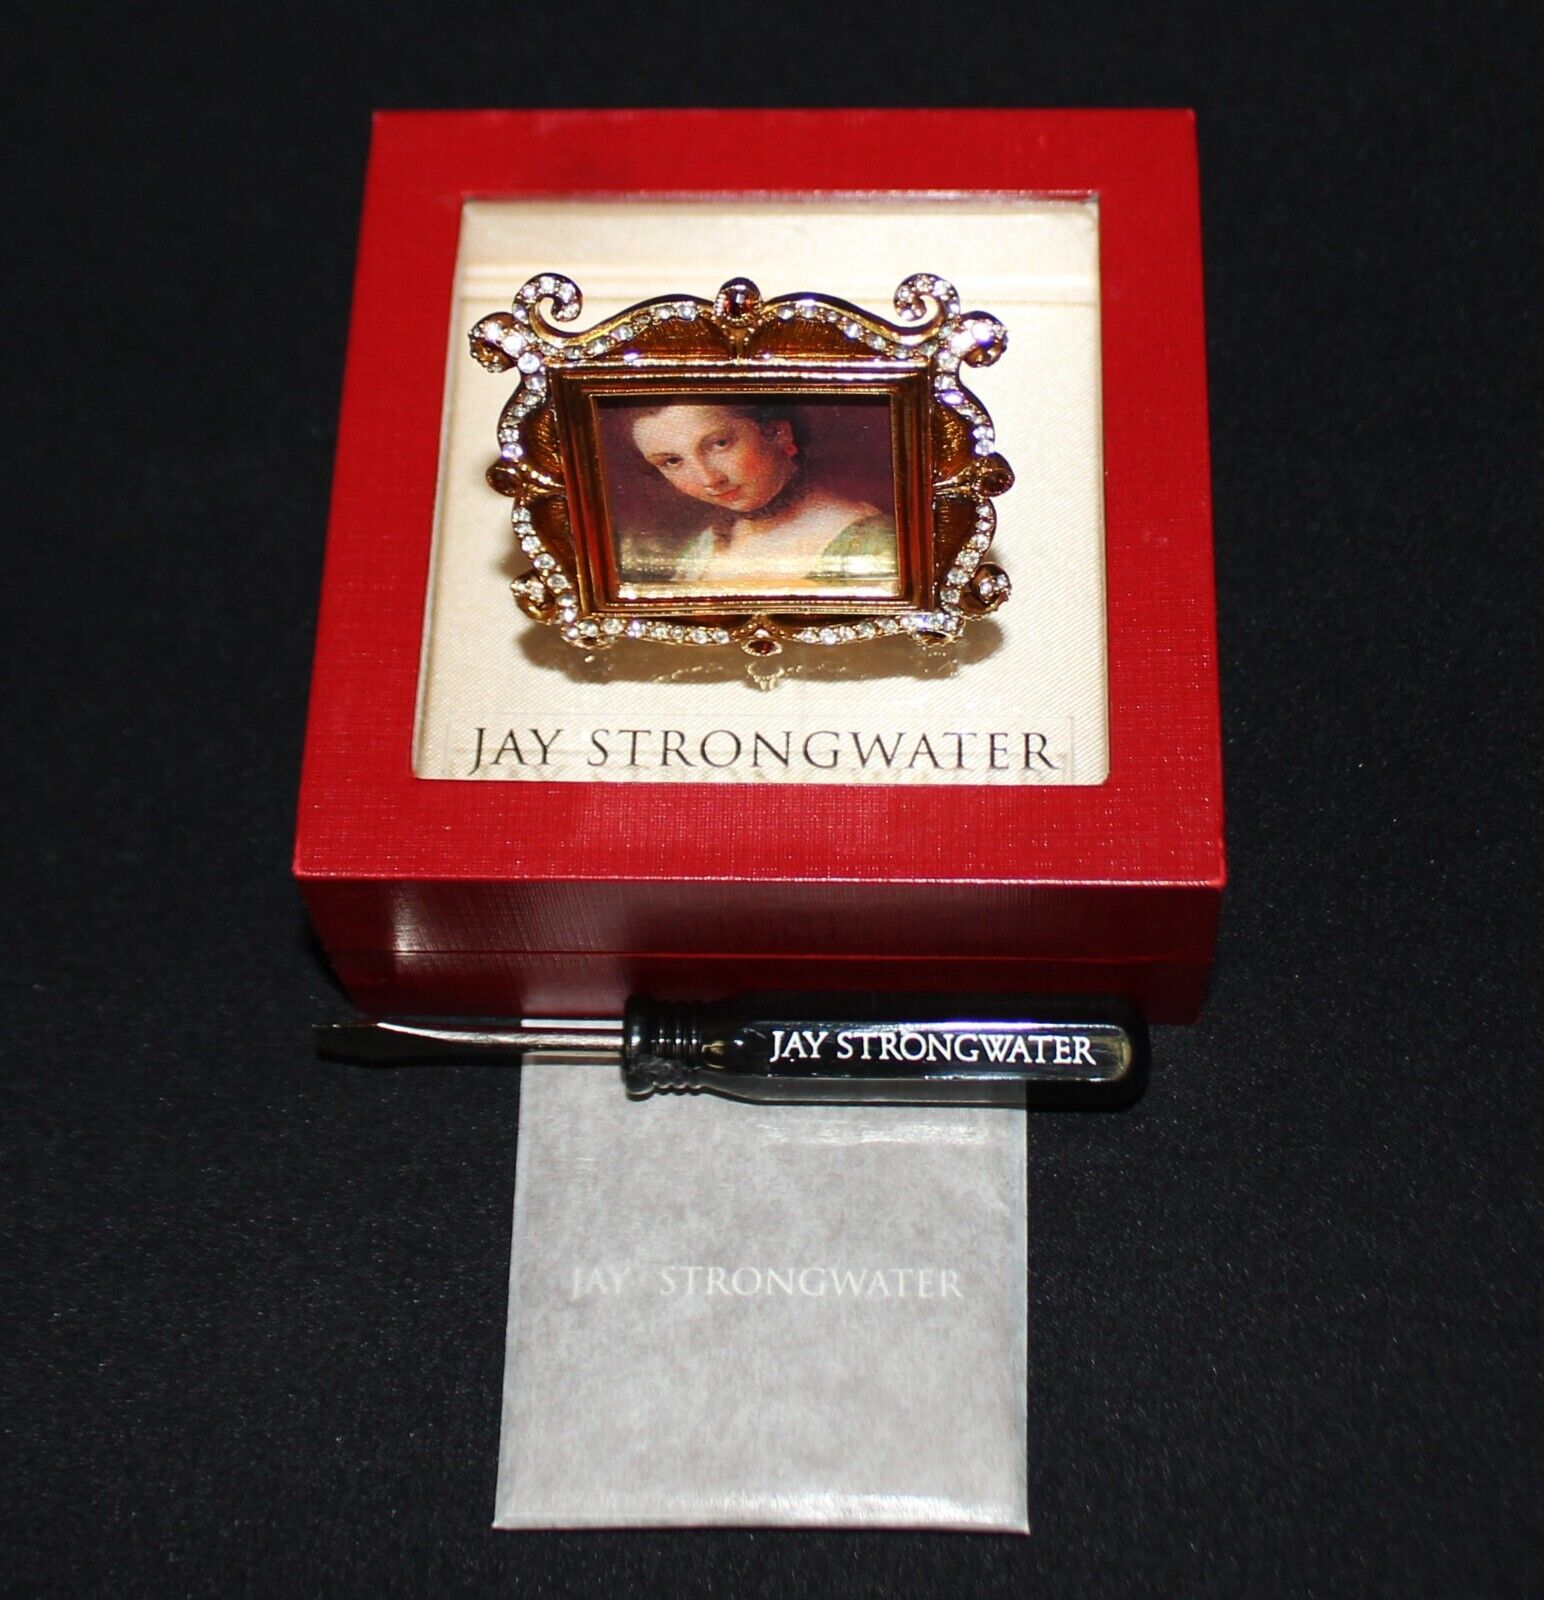 Jay Strongwater Swarovski Crystal & Enameled Miniature Picture Frame in Box